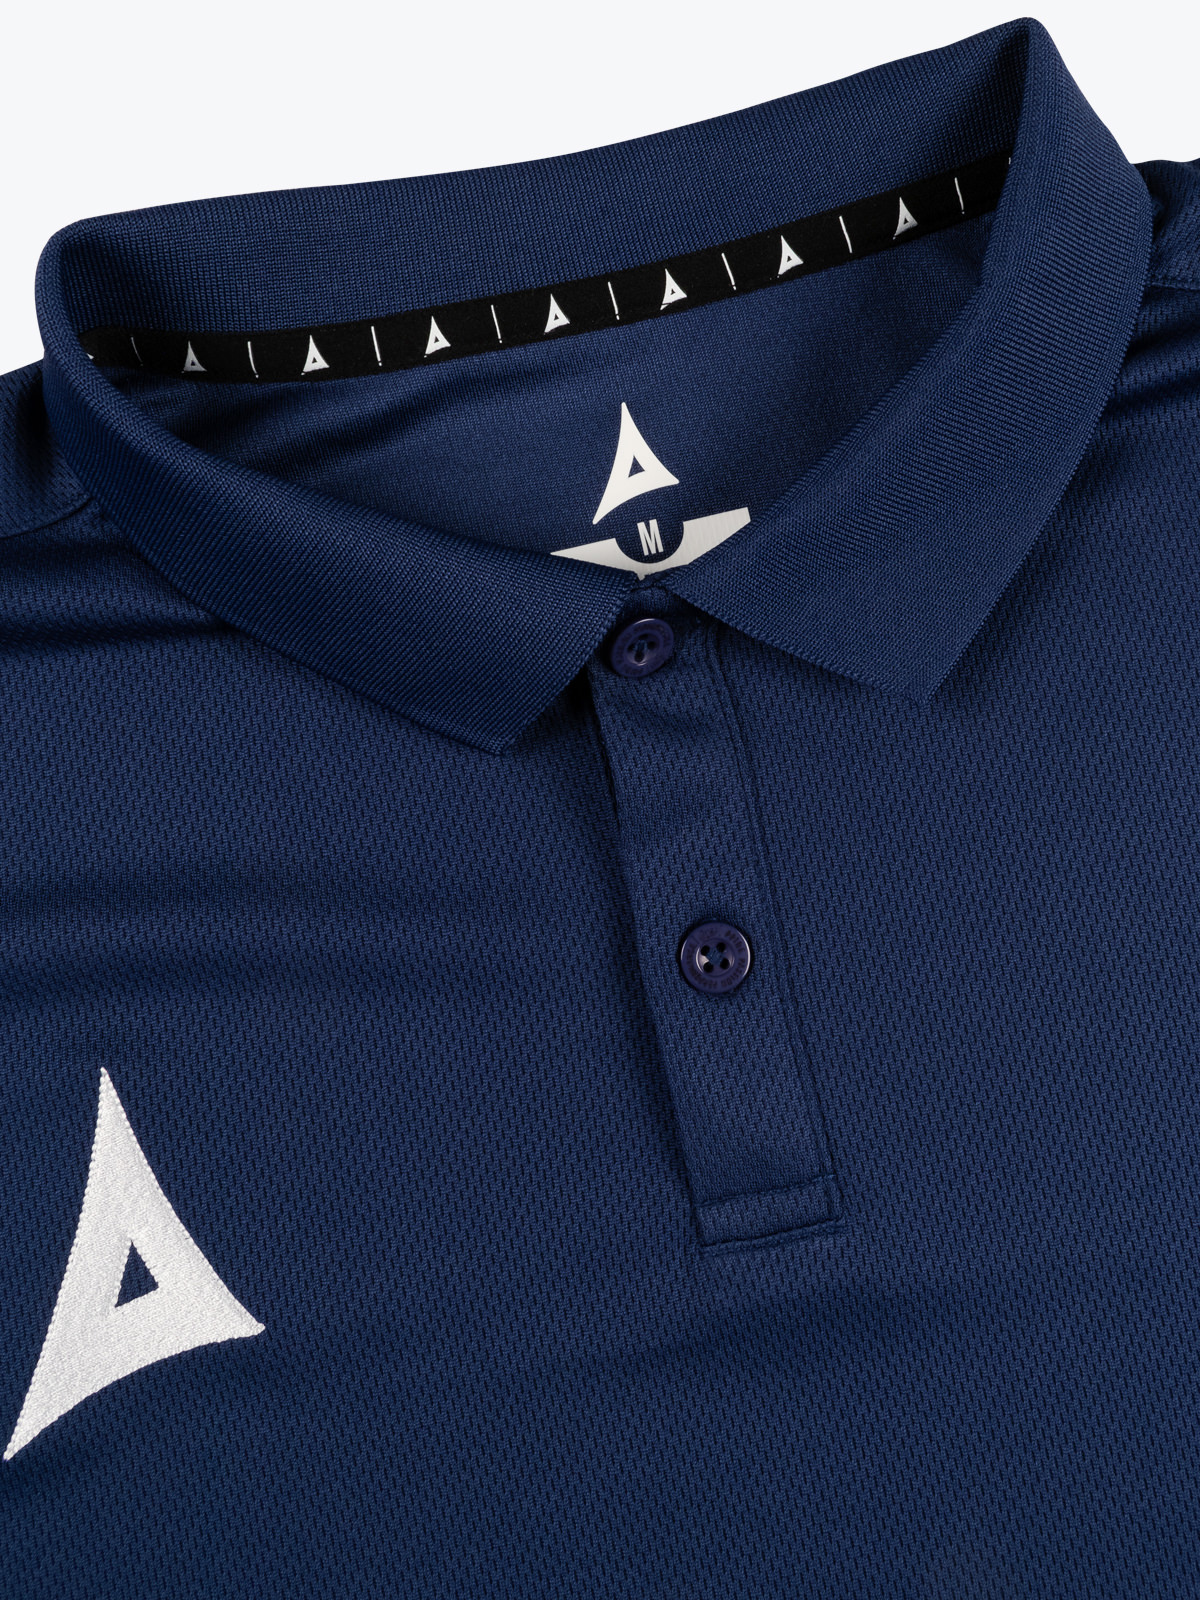 picture of focus 2 tech polo - navy